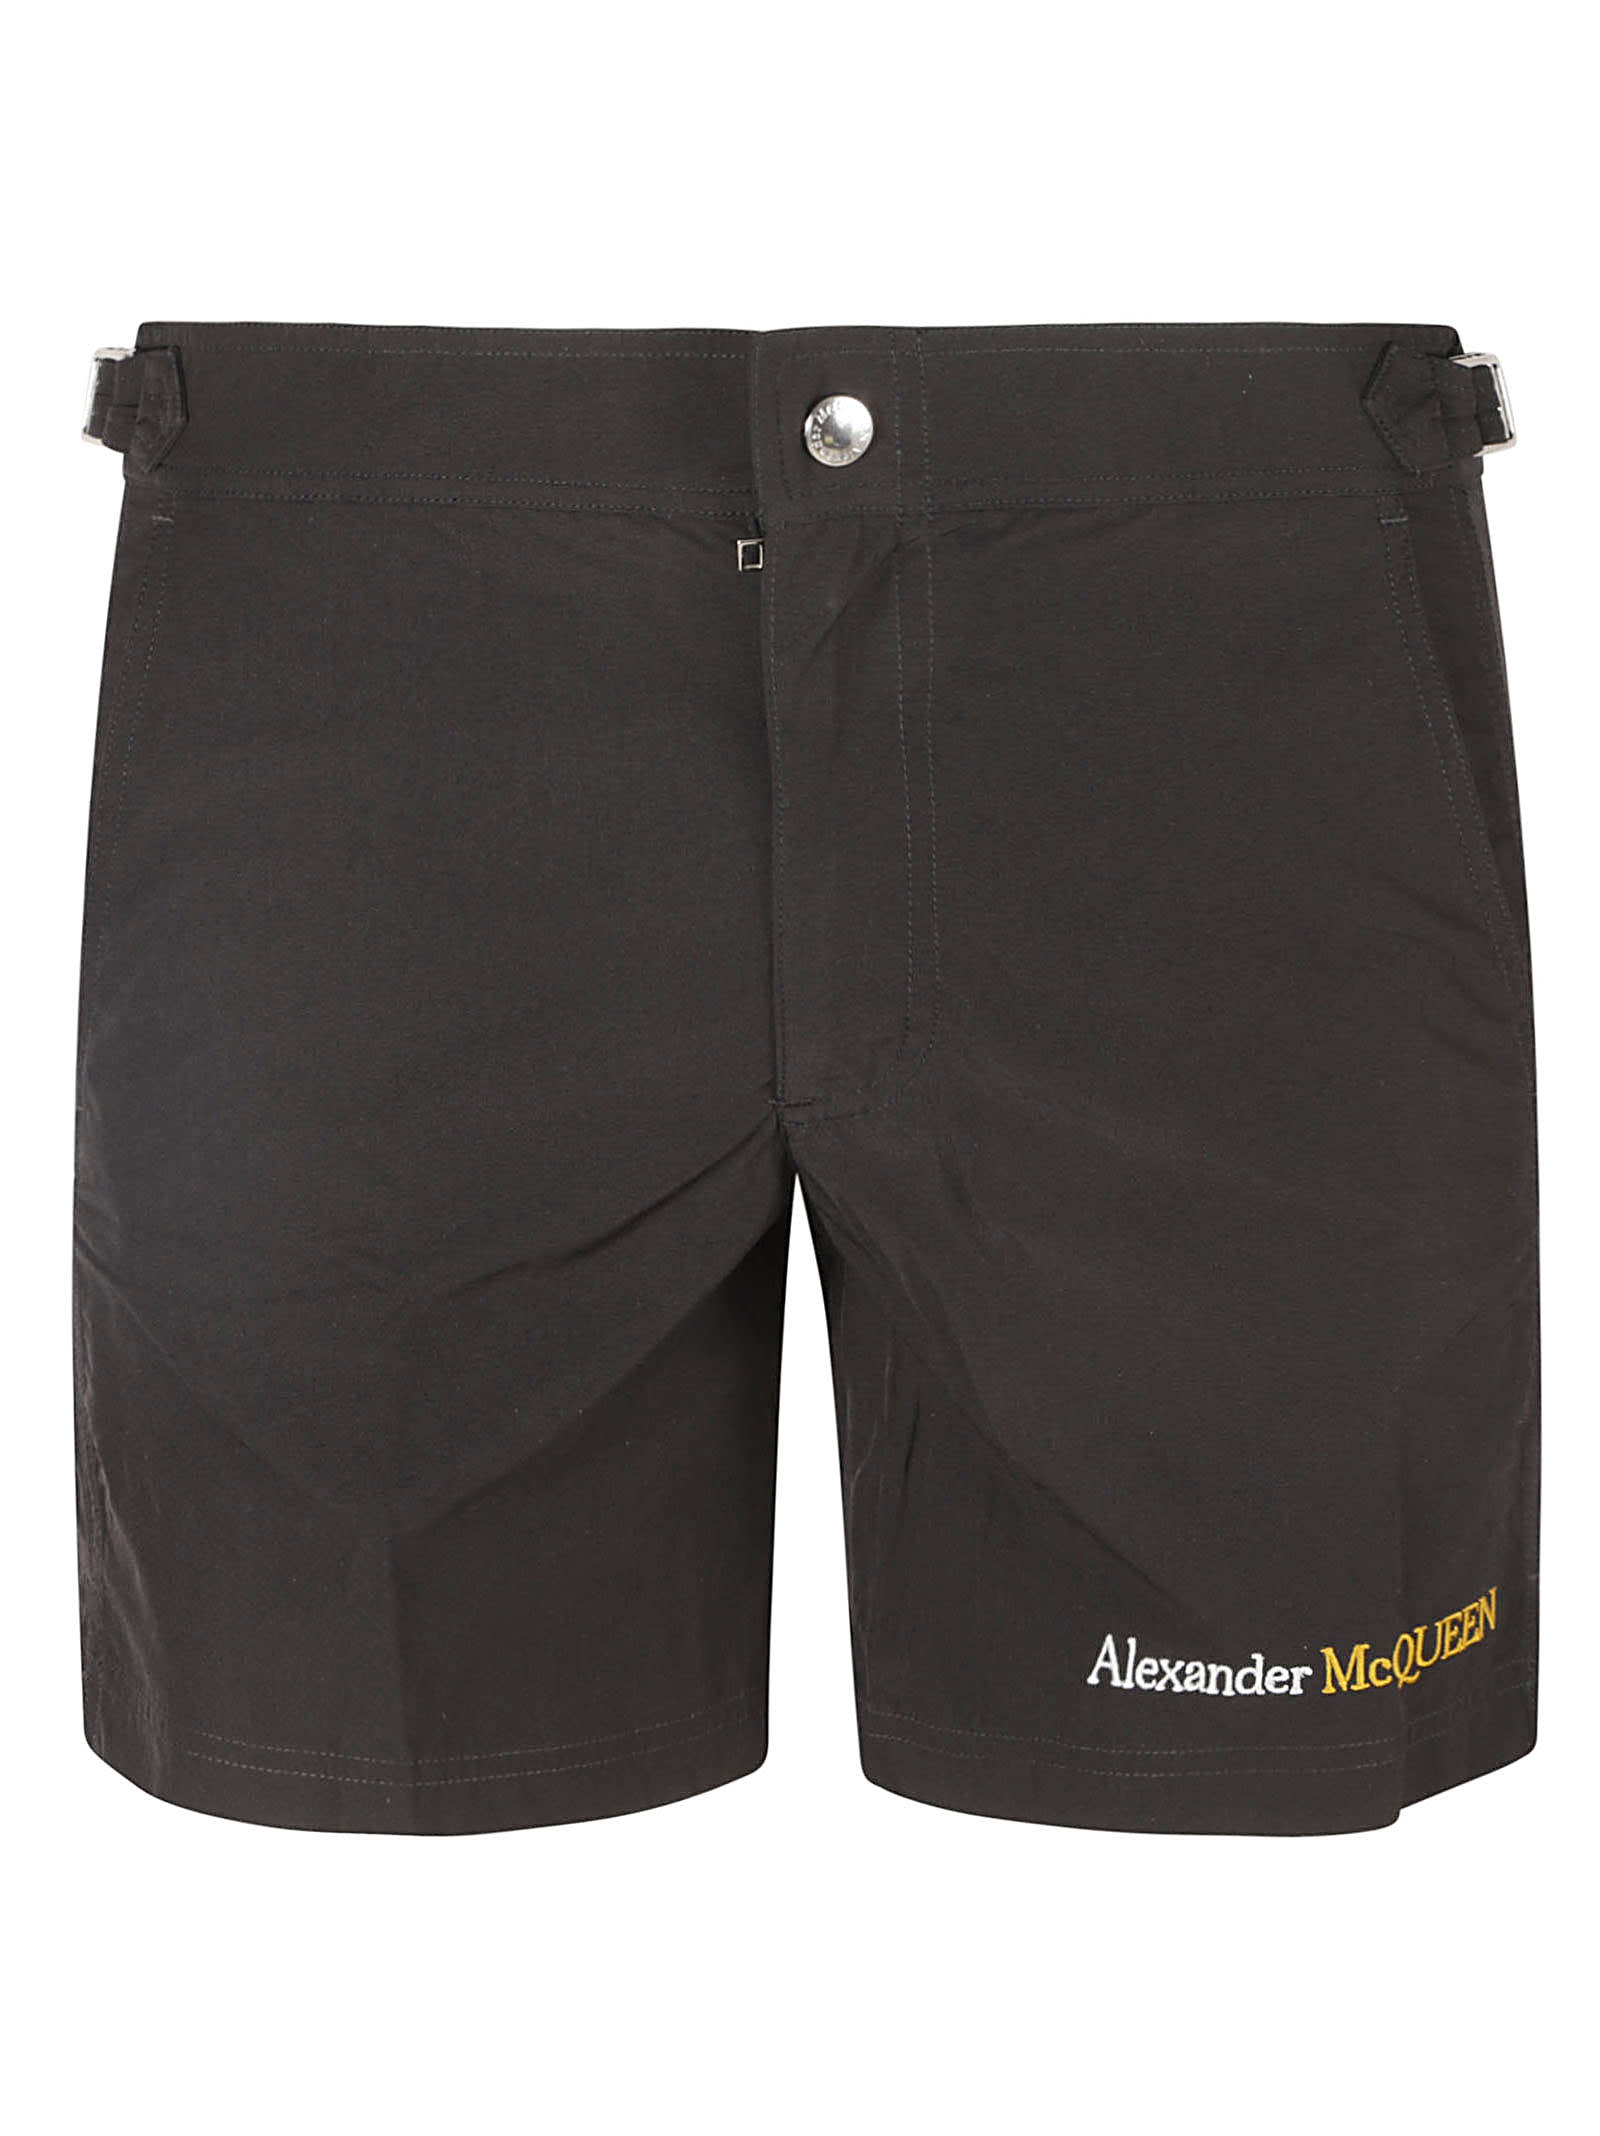 Alexander Mcqueen Logo Fitted Shorts In Black/gold